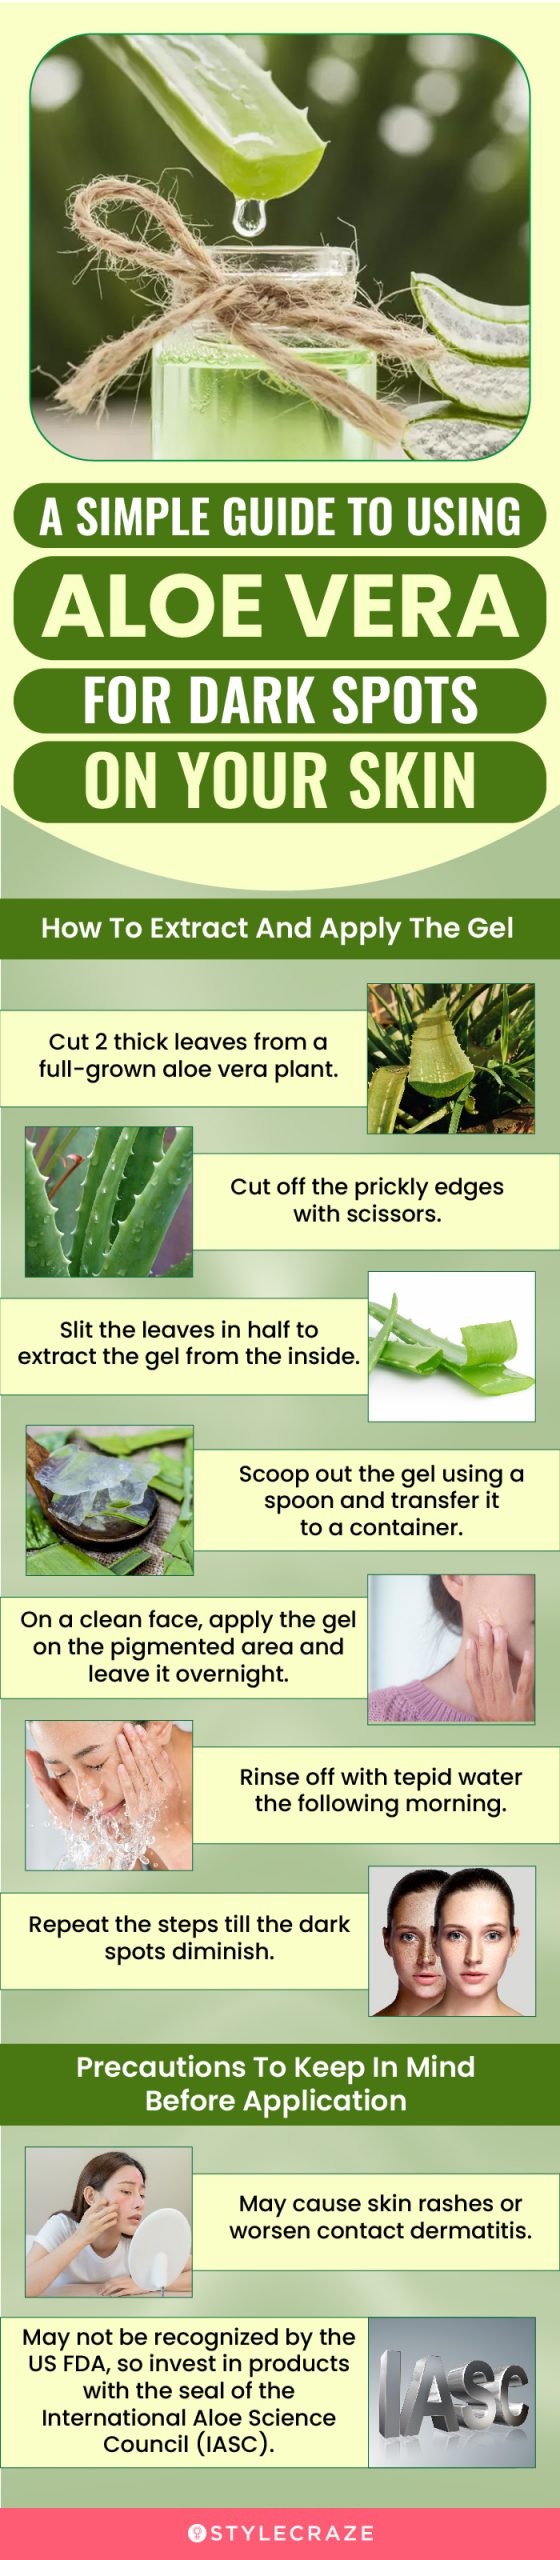 a simple guide to using aloe vera for dark spots on your skin (infographic)